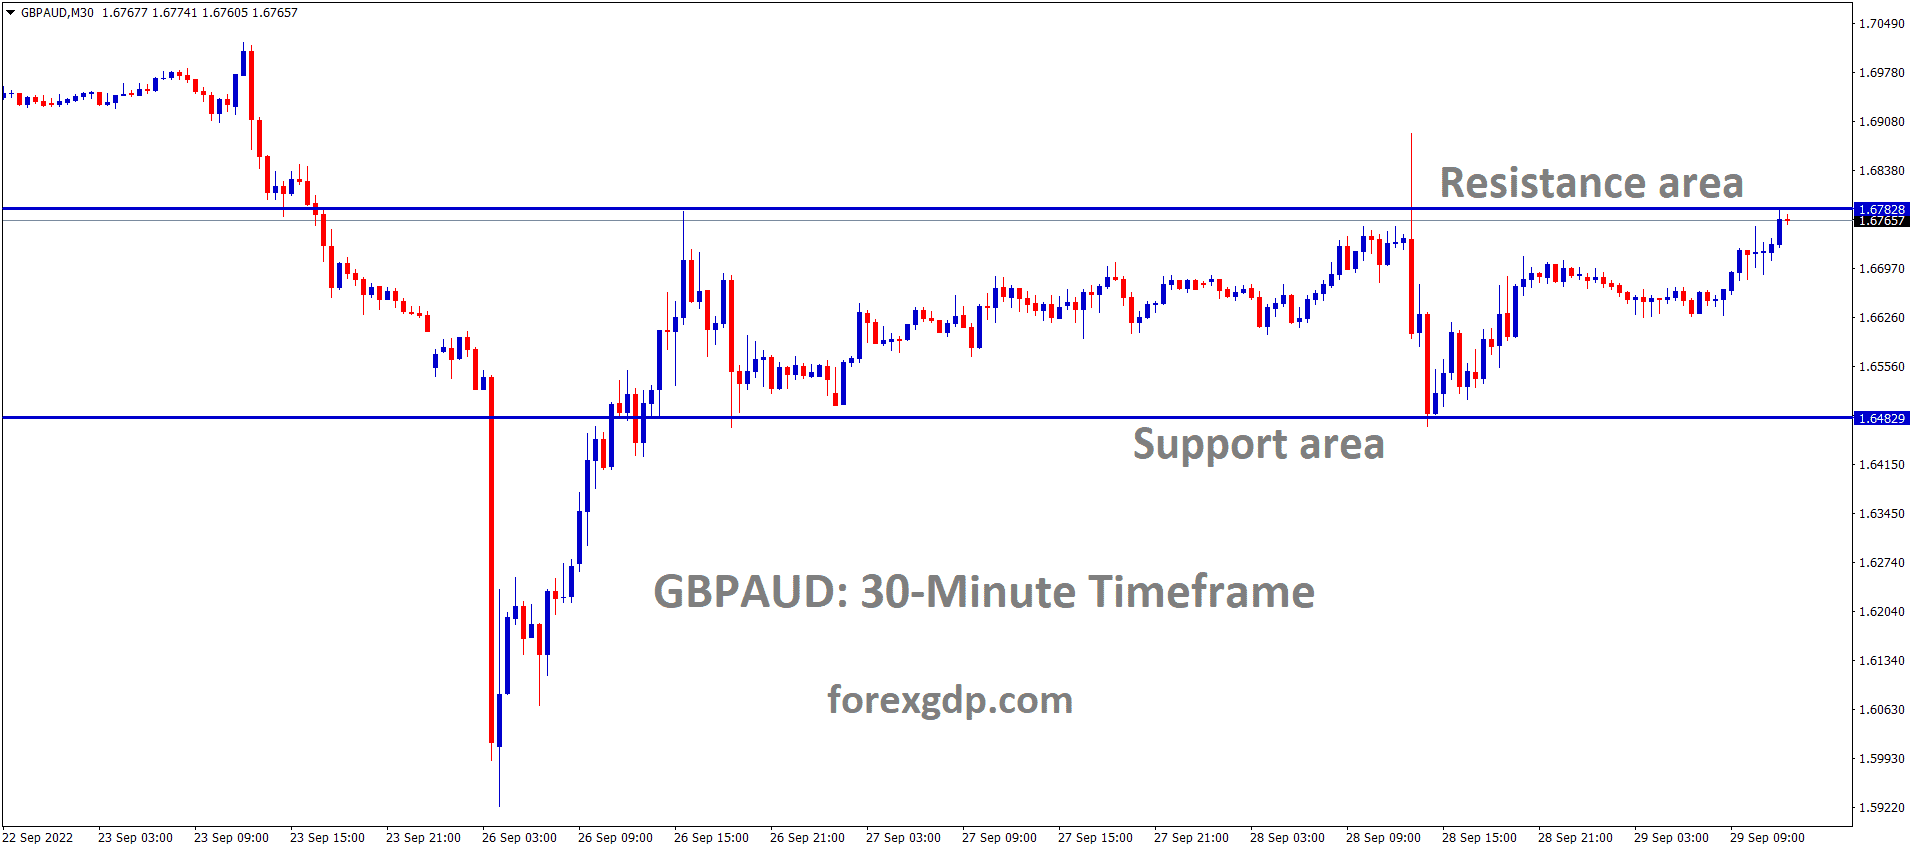 GBPAUD is moving in the Box pattern and the market has reached the resistance area of the pattern